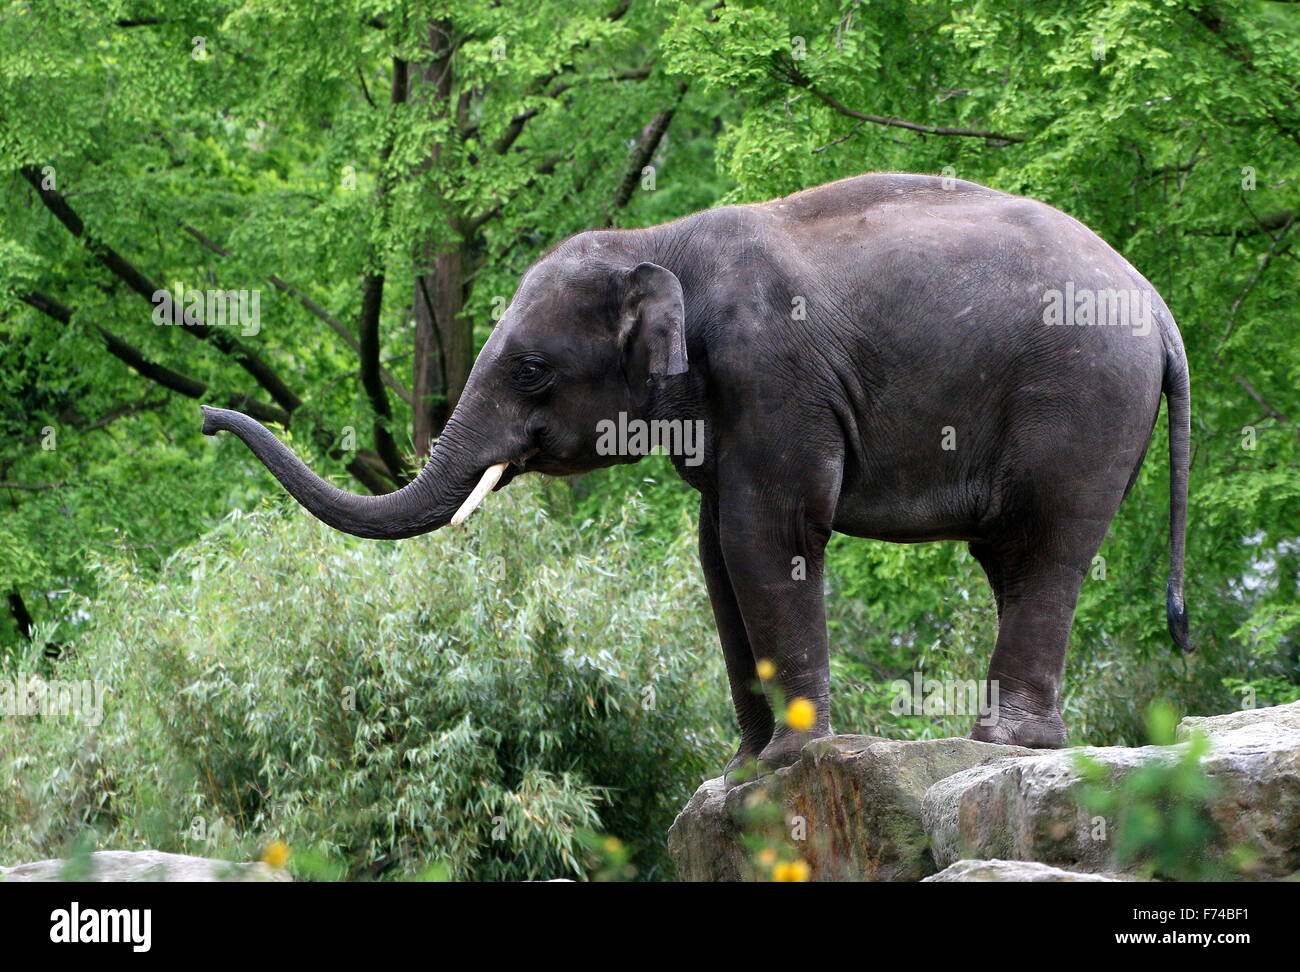 Asian elephant (Elephas maximus Indicus) standing on a rock, swinging his trunk Stock Photo